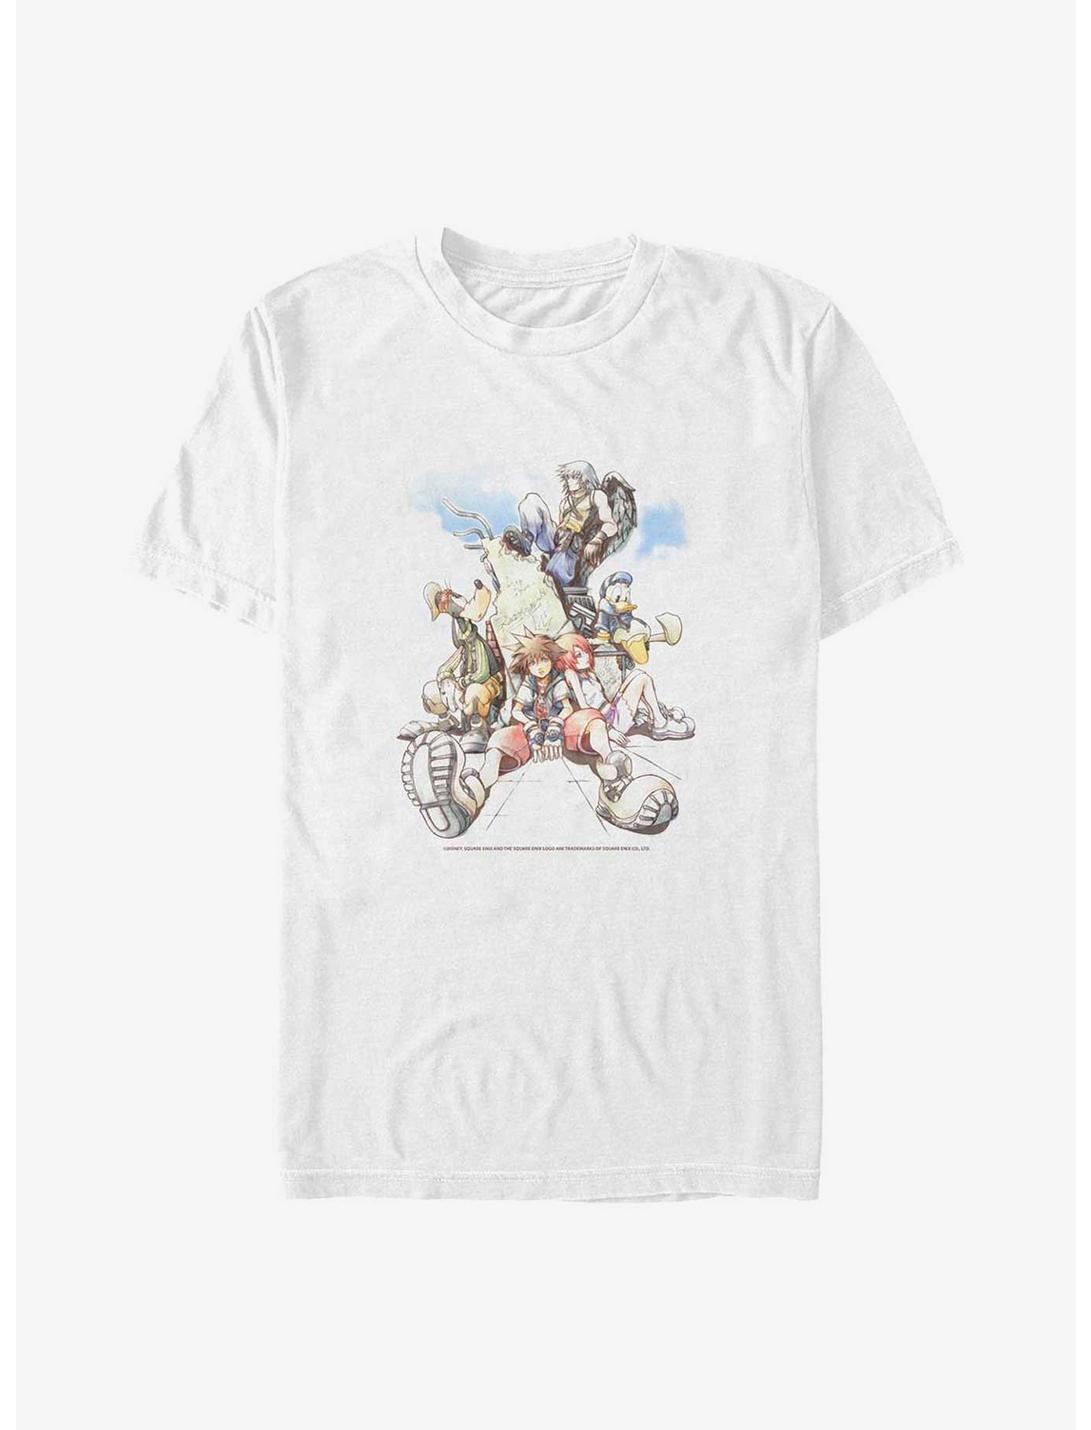 Disney Kingdom Hearts Group In The Clouds Big & Tall T-Shirt, WHITE, hi-res